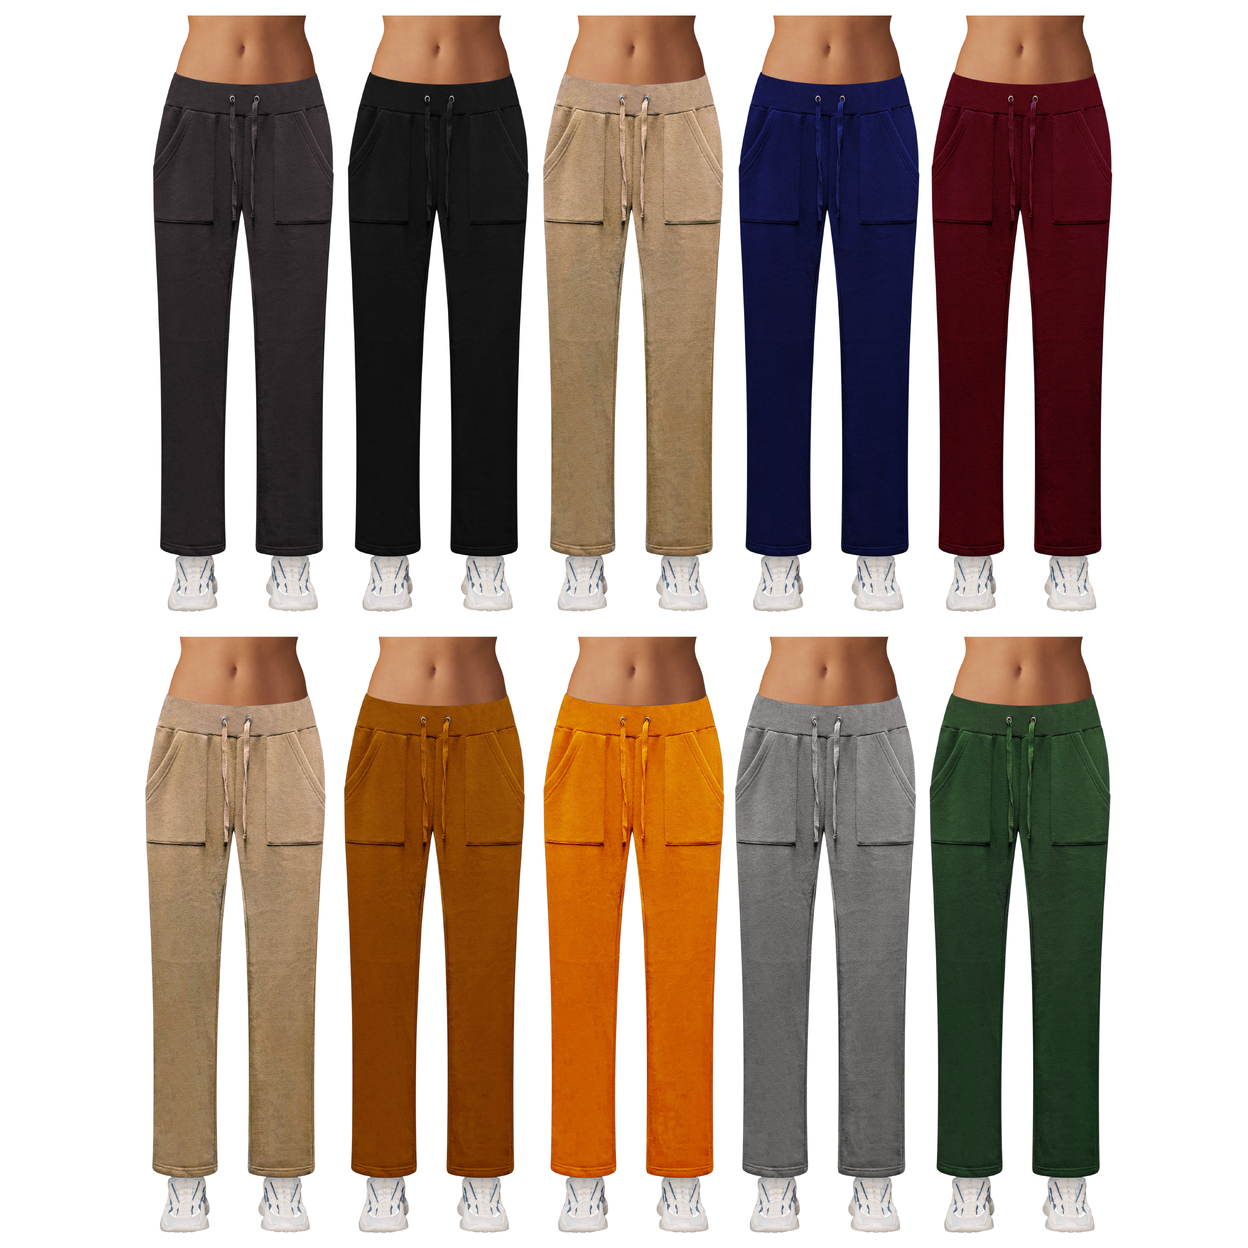 Multi-Pack: Women's Ultra-Soft Cozy Fleece Lined Elastic Waistband Terry Knit Pants - 3-pack, X-large